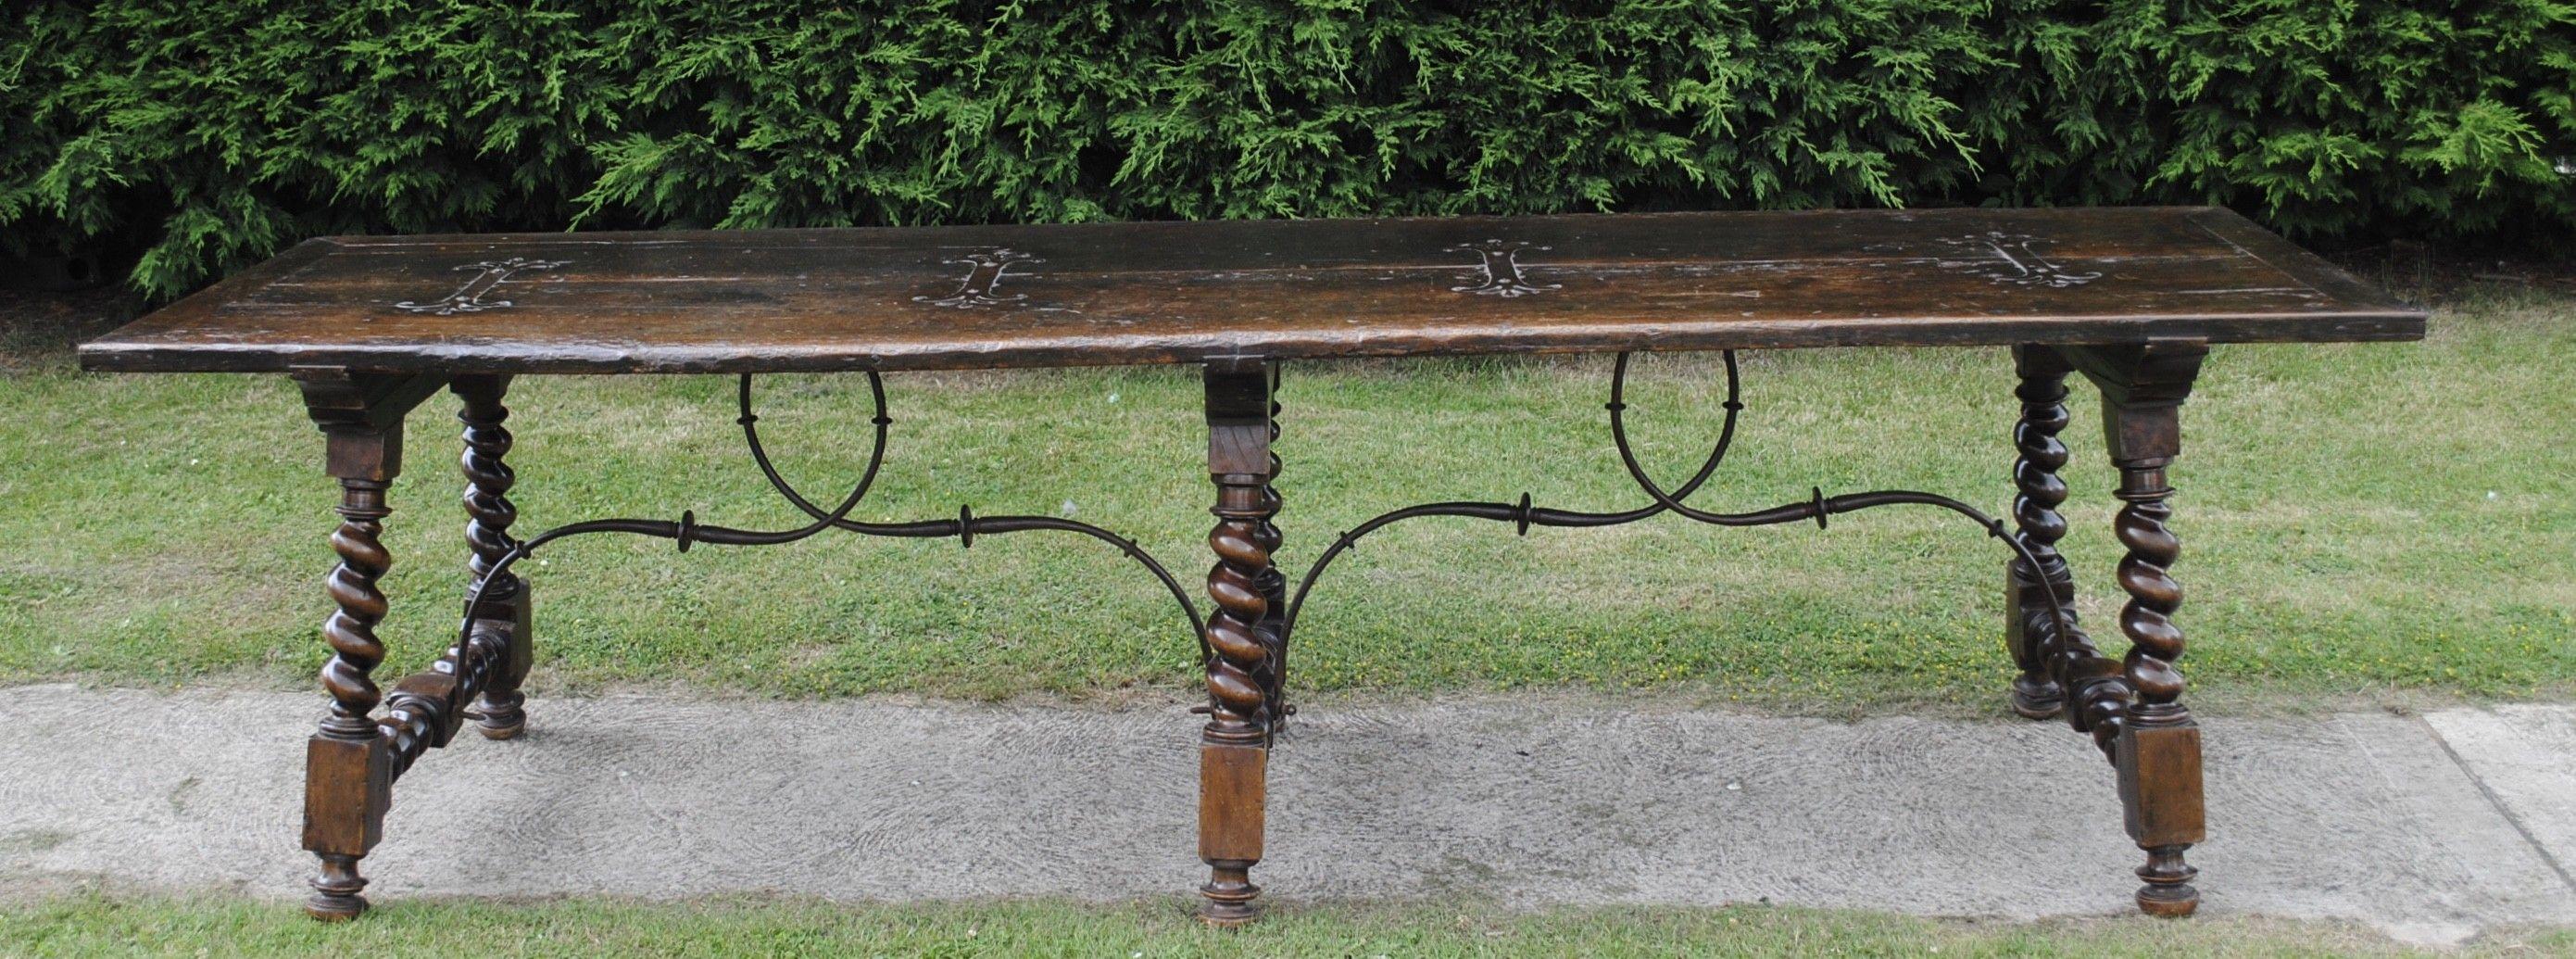 A fine large Spanish walnut refectory table featuring bobbin turned legs and stretchers and good metal work. Of great color.
  